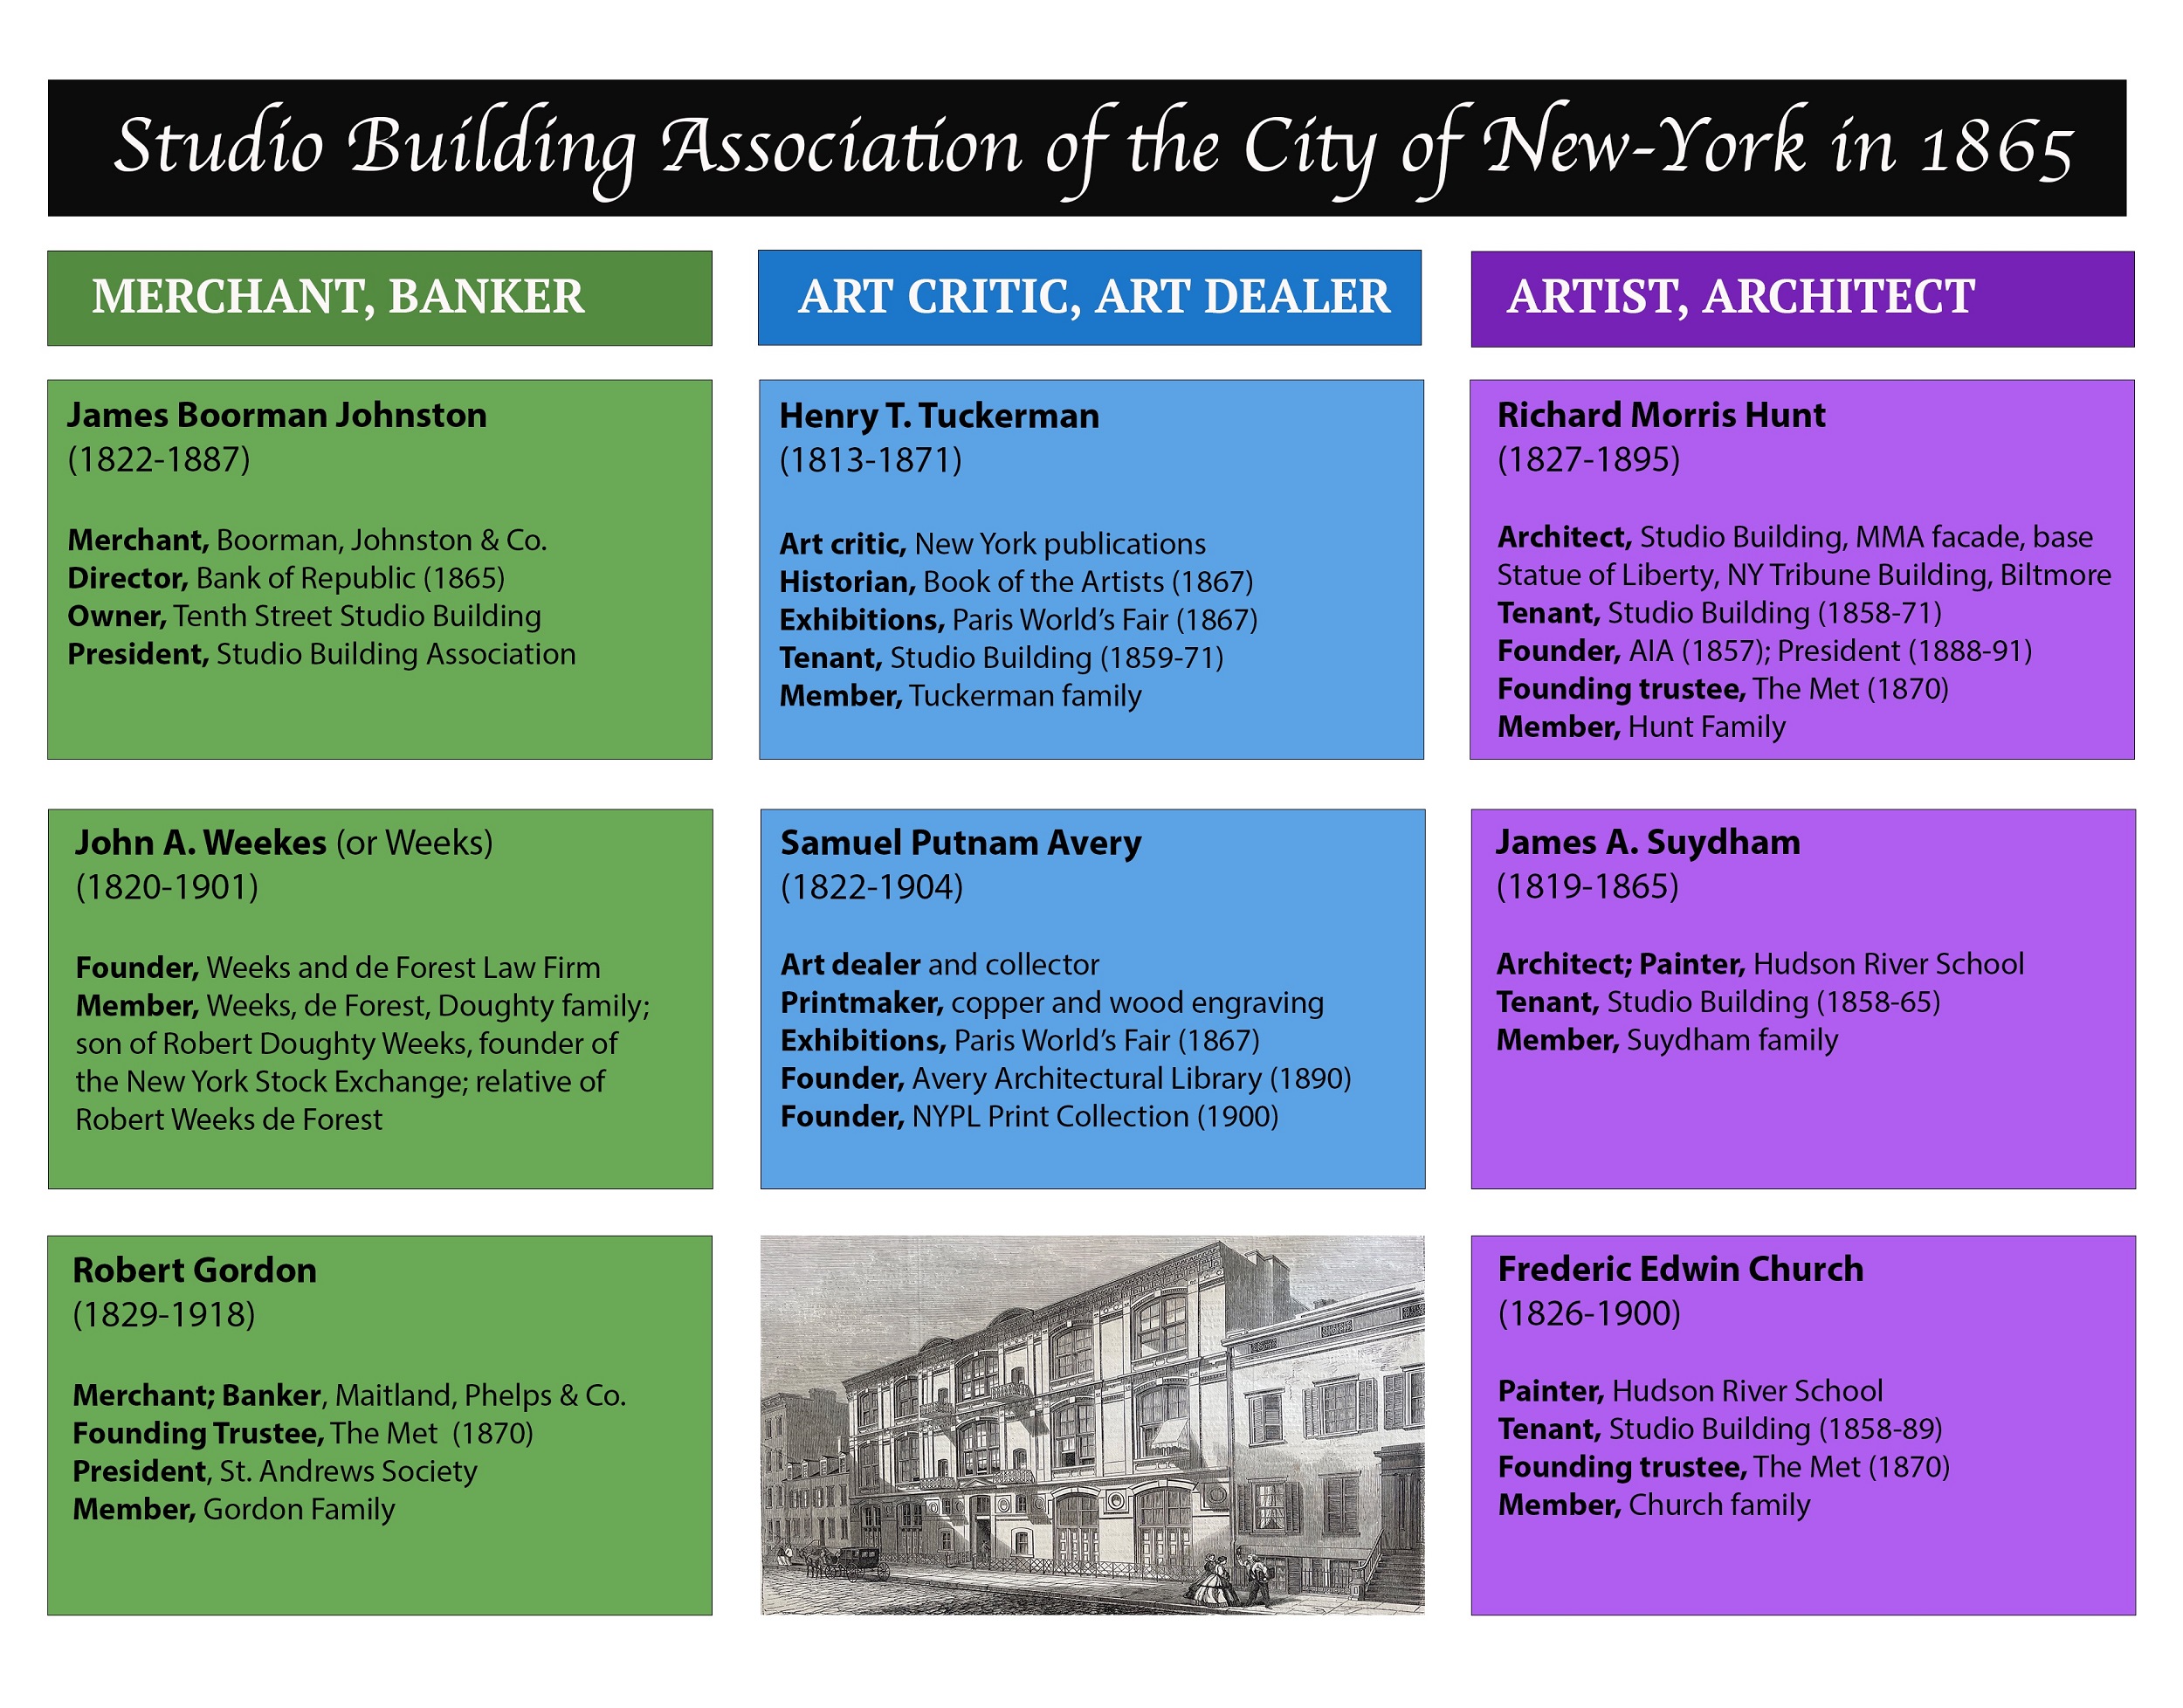 Info graphic showing details about three categories of people related to the Studio Building: "Merchant, Banker"; "Art Critic, Art Dealer"; and "Artist, Architect."